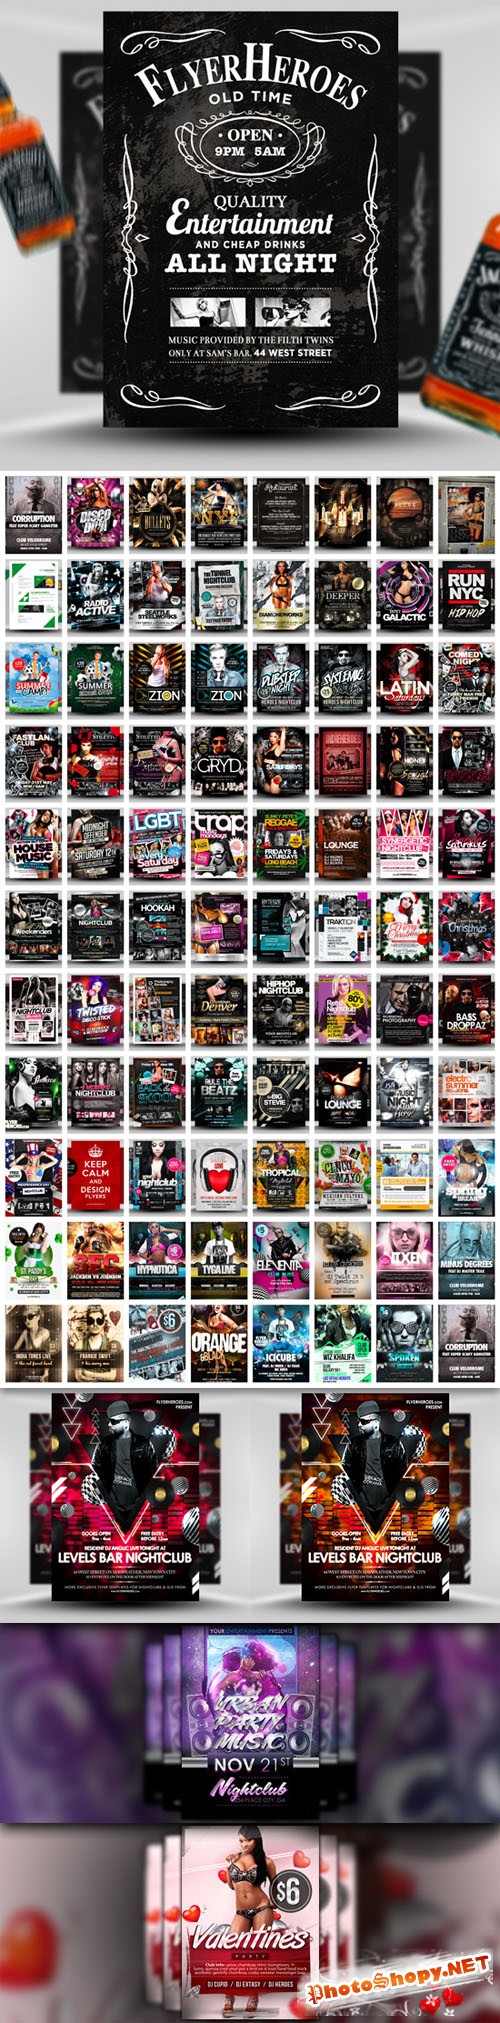 Big Party Flyers and Posters PSD Templates Bundle by FlyerHeroes